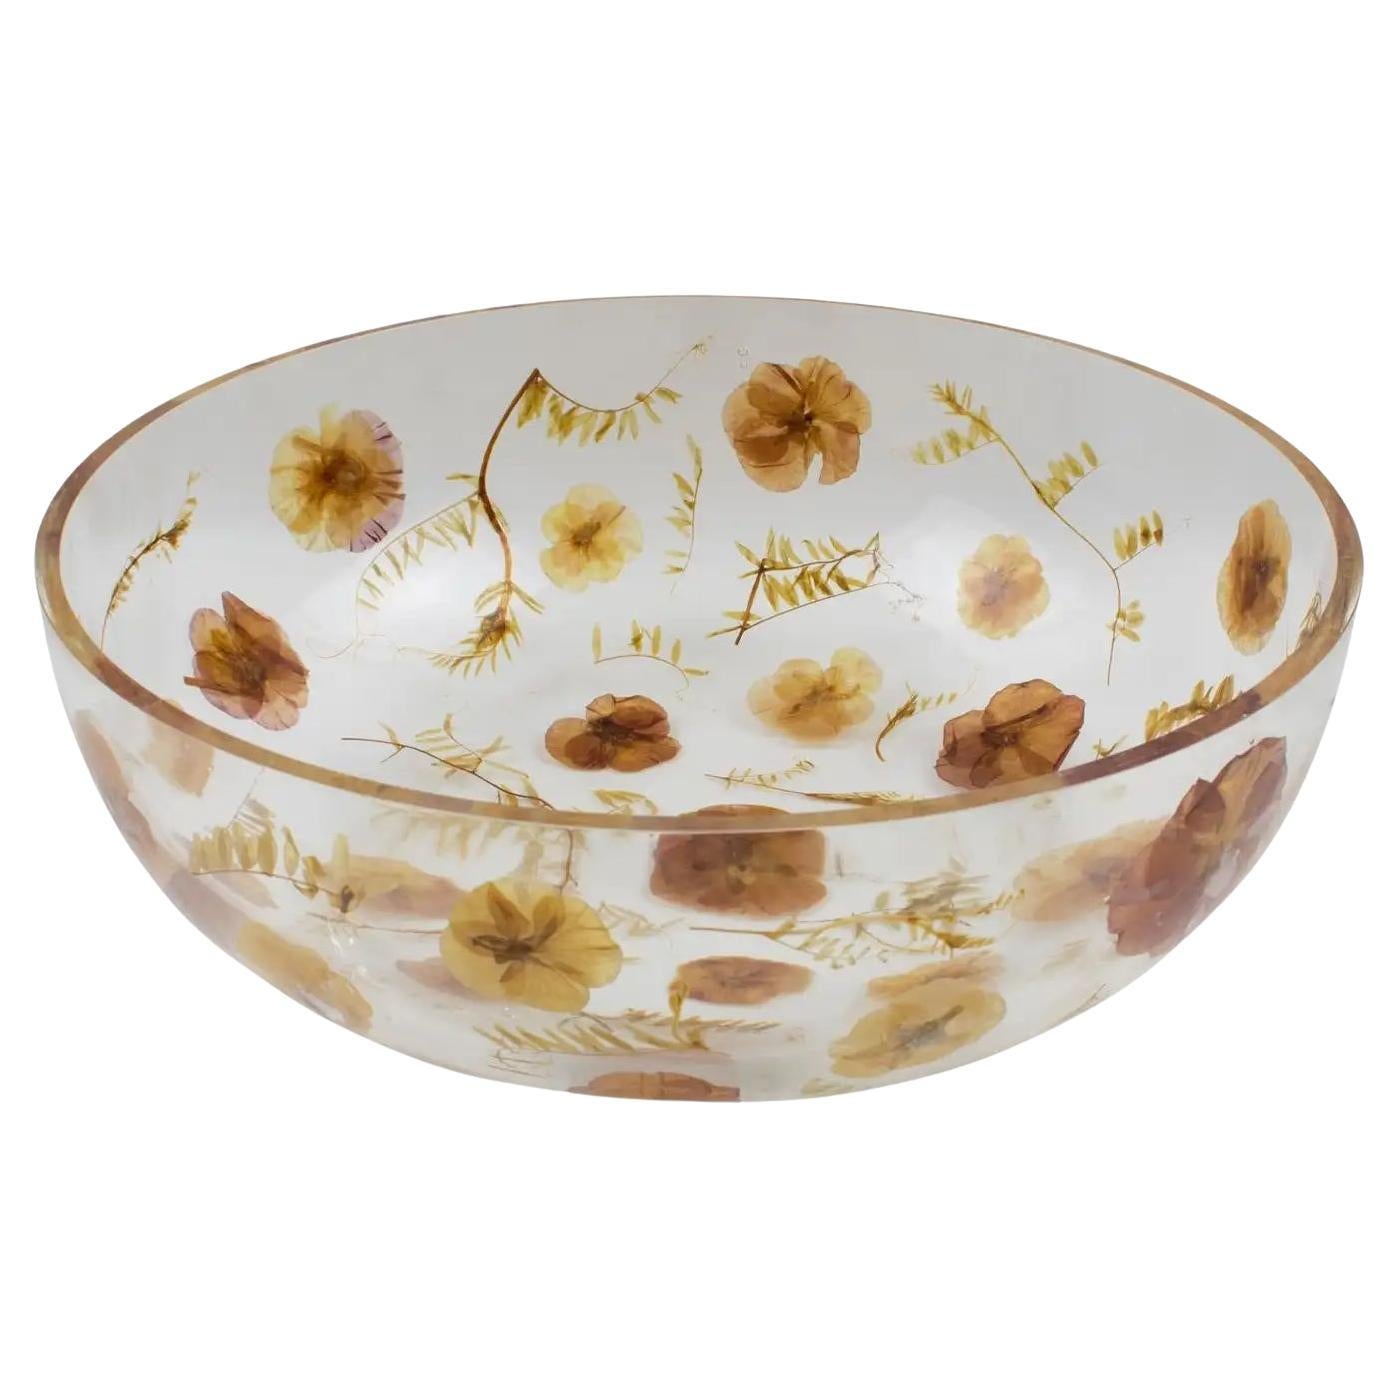 Resin Centerpiece Bowl, Leaves and Flowers Inclusions, Italy 1970s For Sale